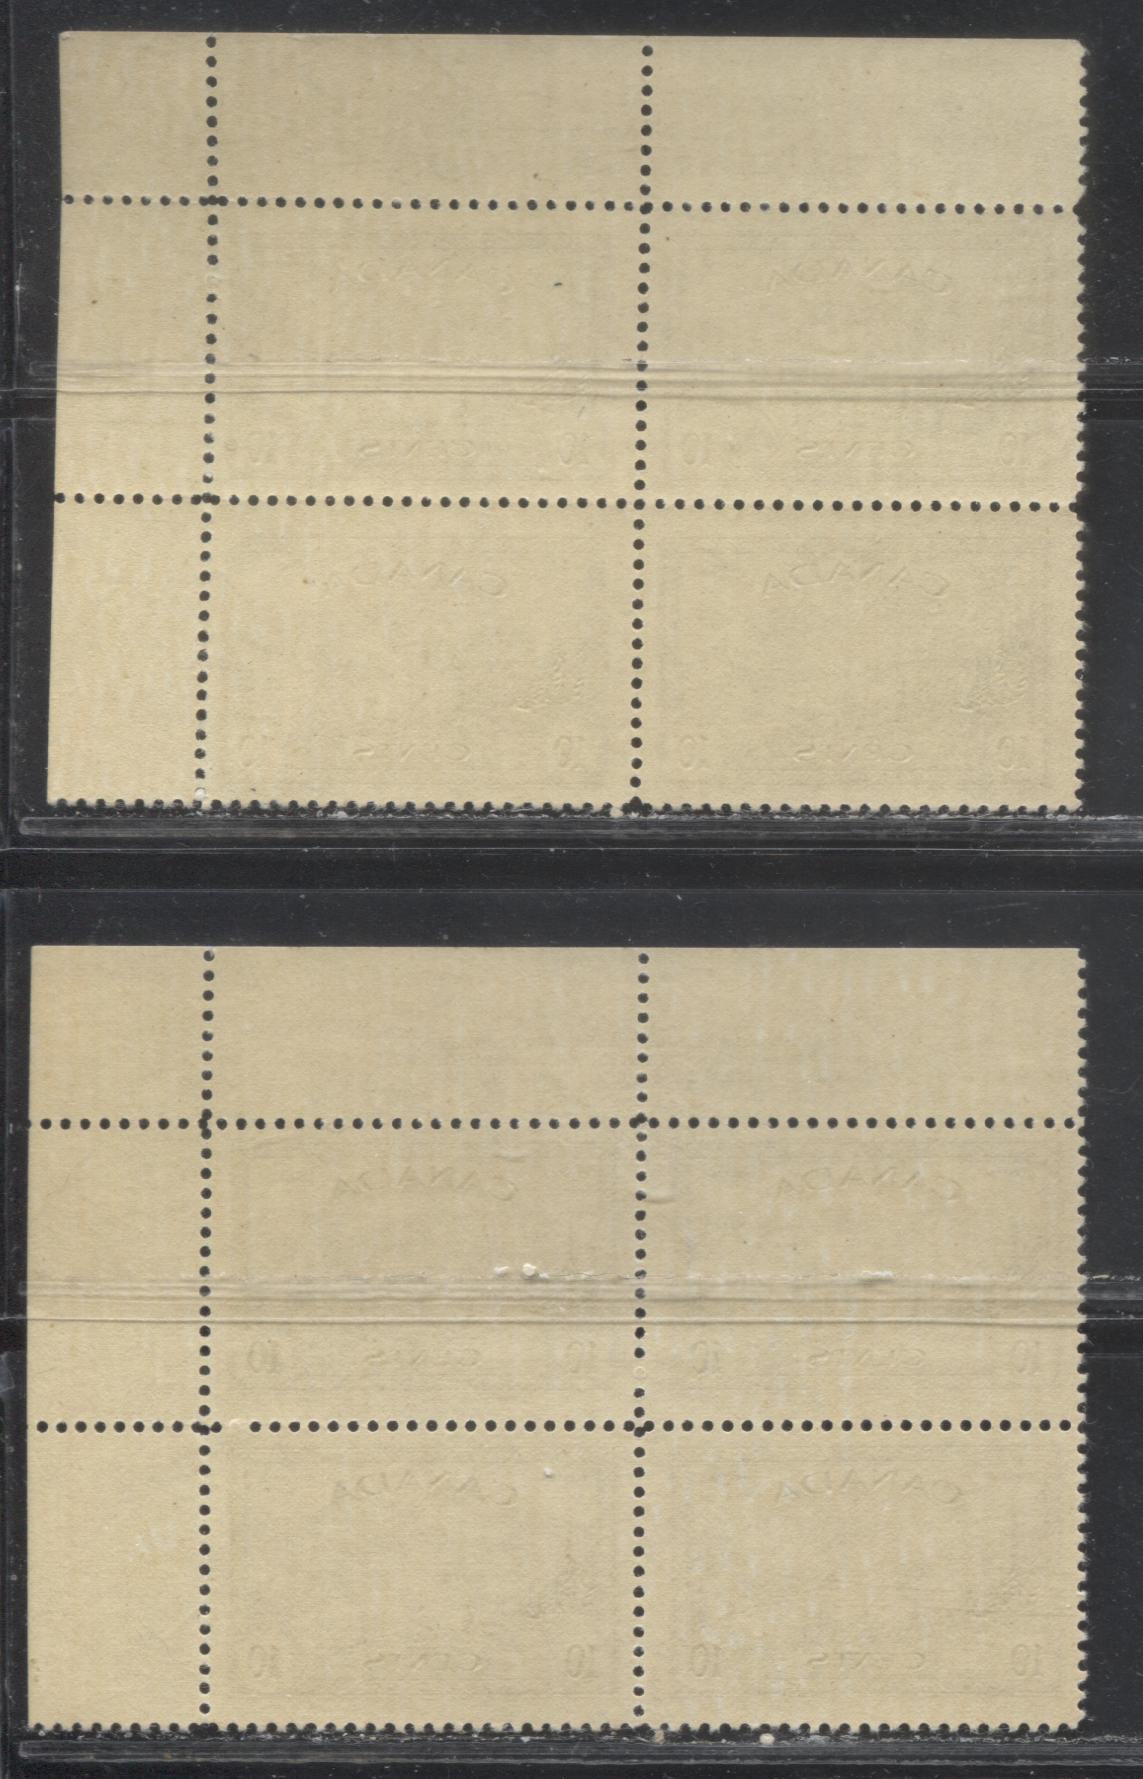 Lot 275 Canada #269 10c Olive Green Great Bear Lake, 1946-1951 Peace Issue, Fine NH Plate 2 Upper Right Blocks of 4, Cream Gum With a Semi-Gloss Sheen, Horizontal Ribbed Paper, With and Without 2 Plate Dots in Right Selvedge